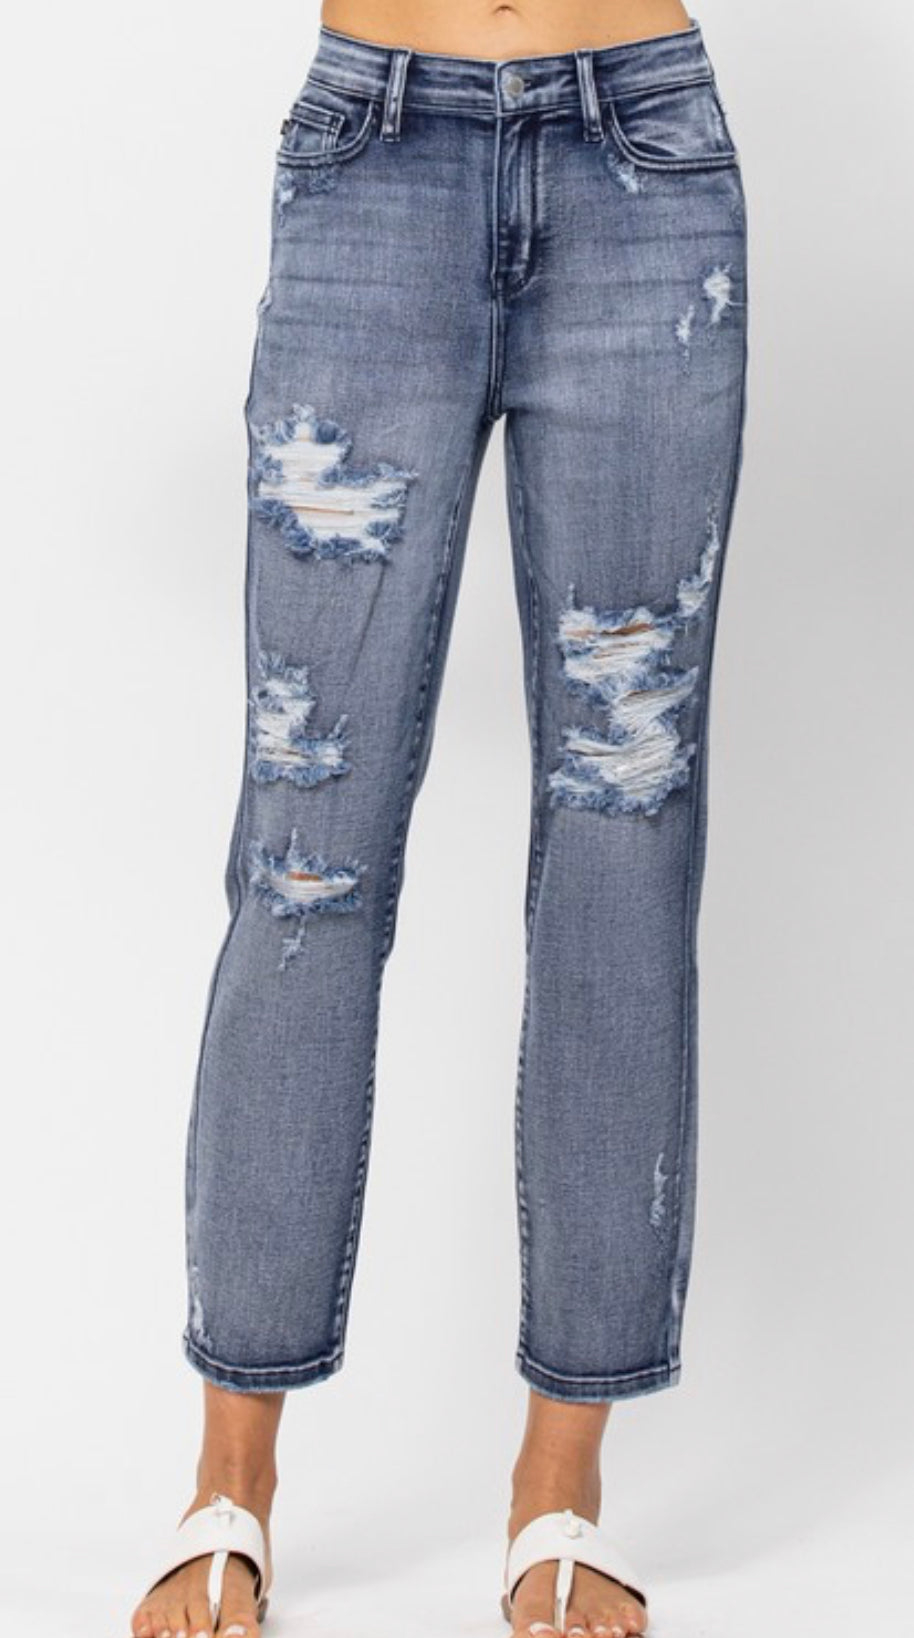 Judy blue jeans distressed Ashley